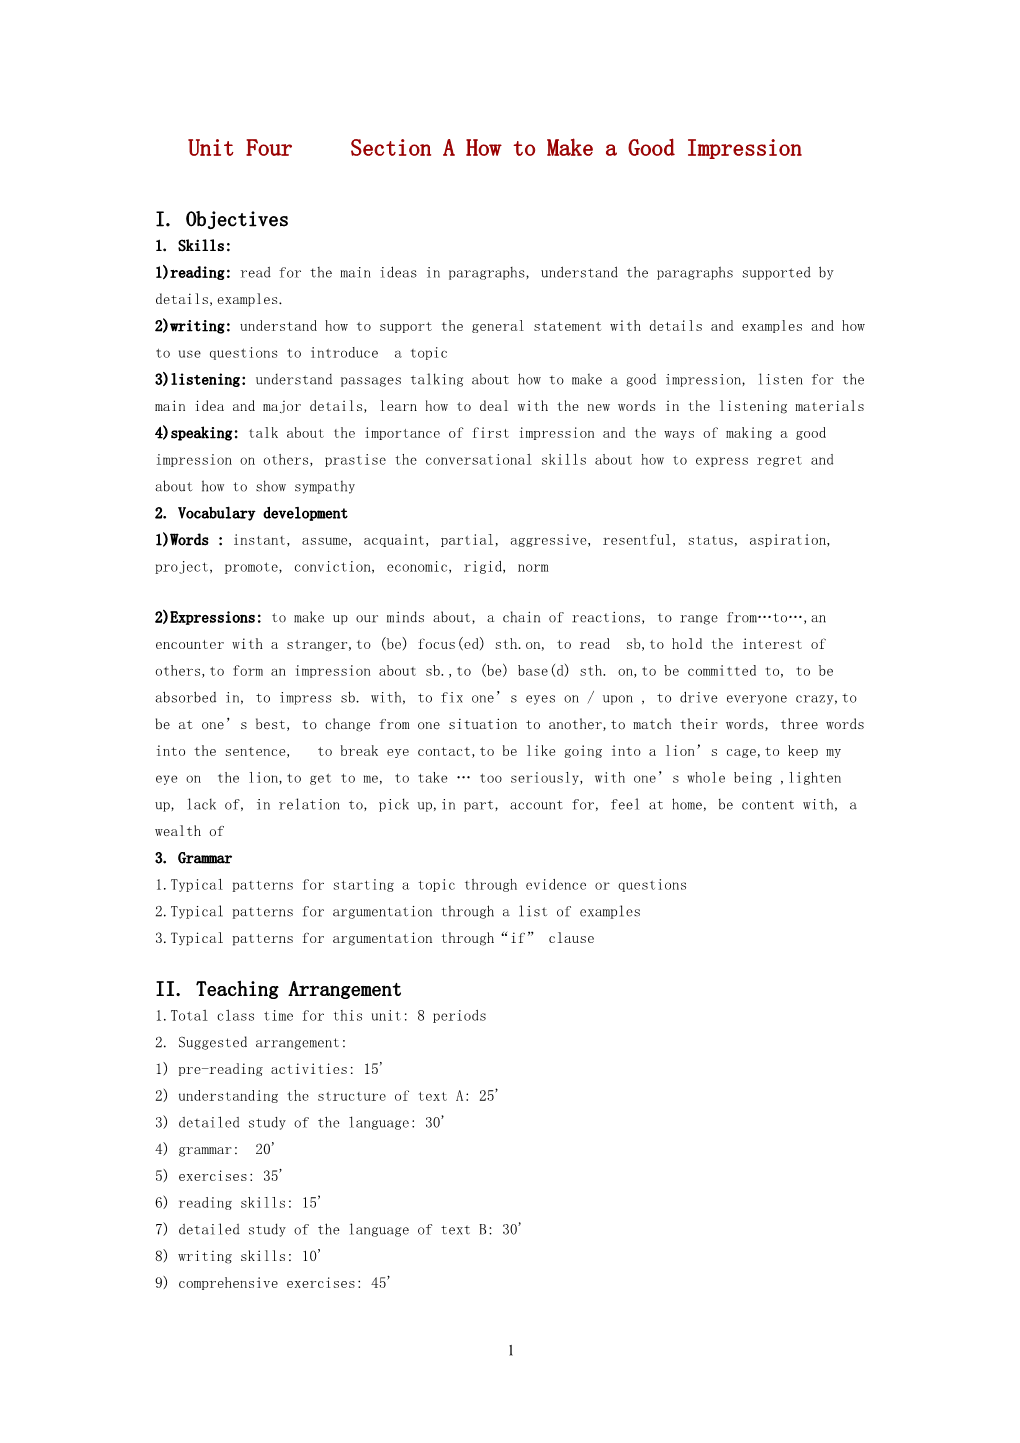 I. Objectives 1. Skills: 1)Reading: Read for the Main Ideas in Paragraphs, Understand The